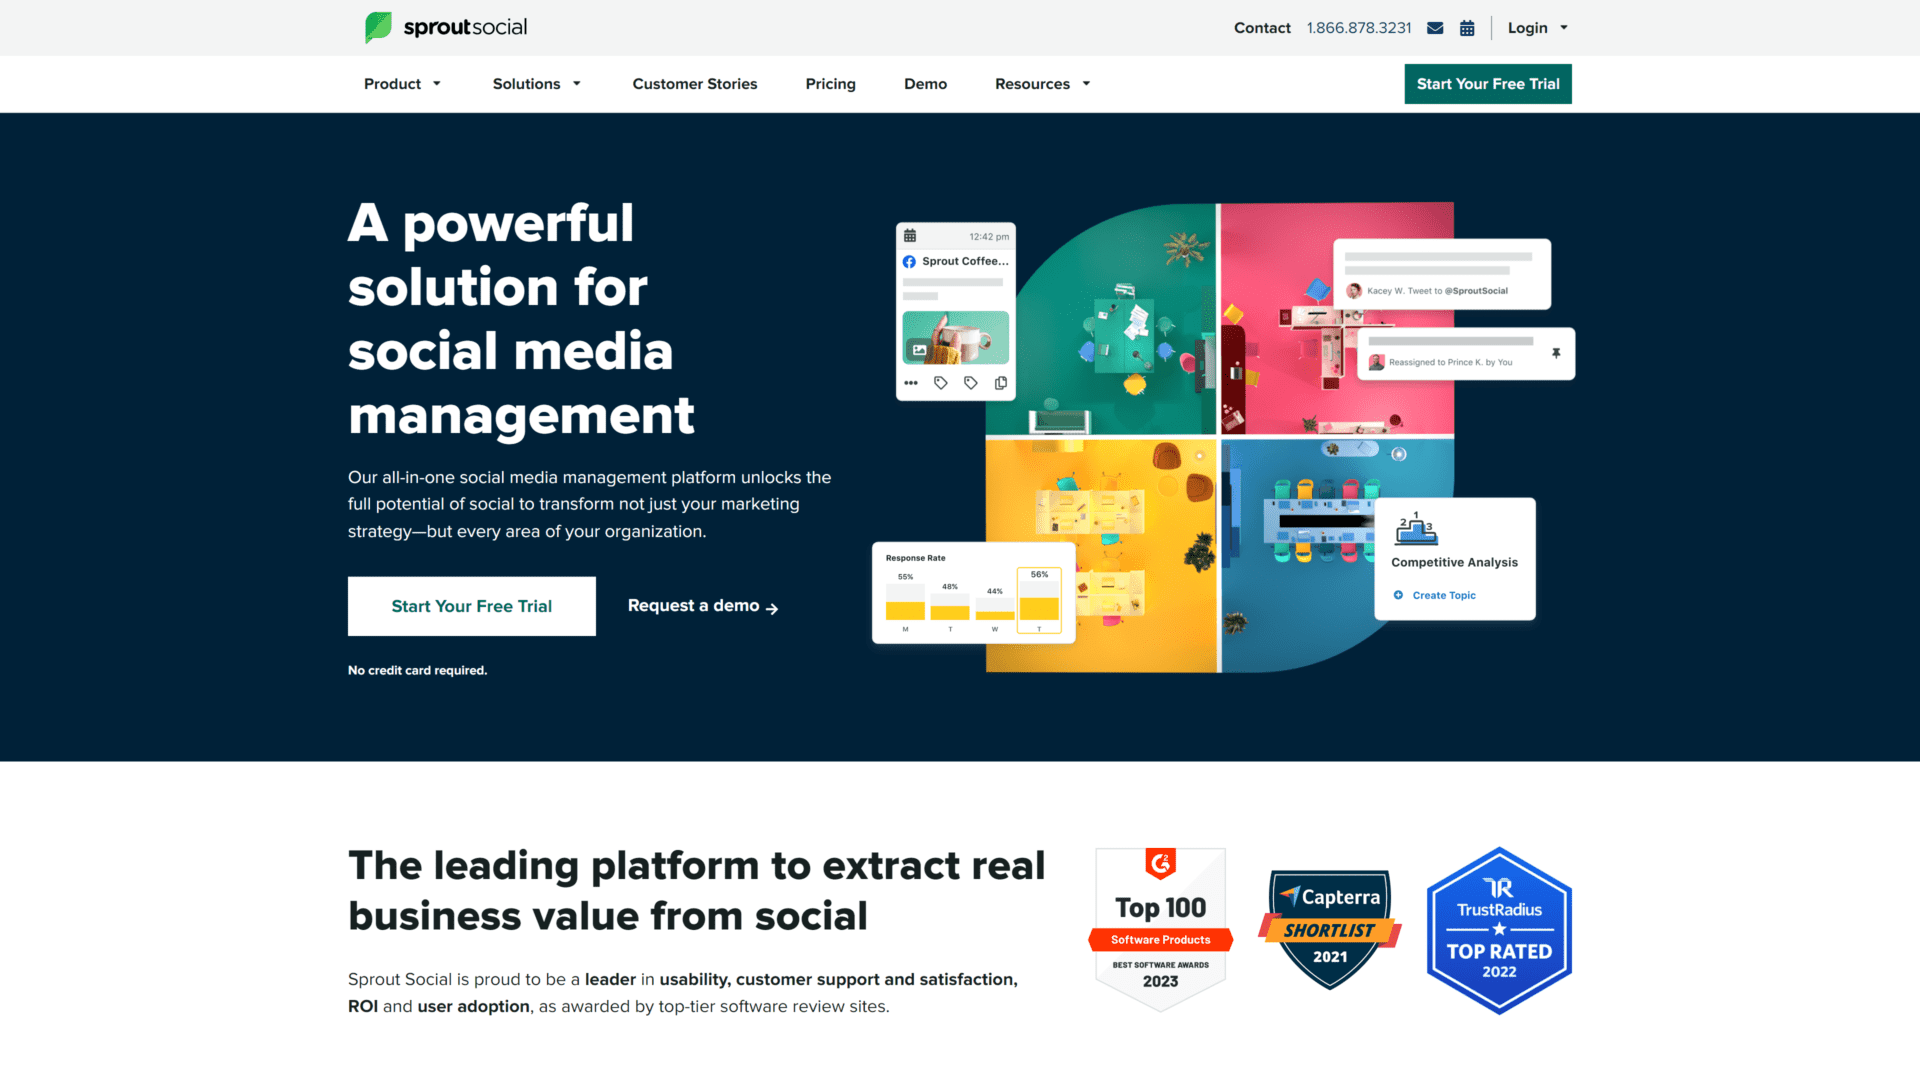 A screenshot of the sprout social homepage